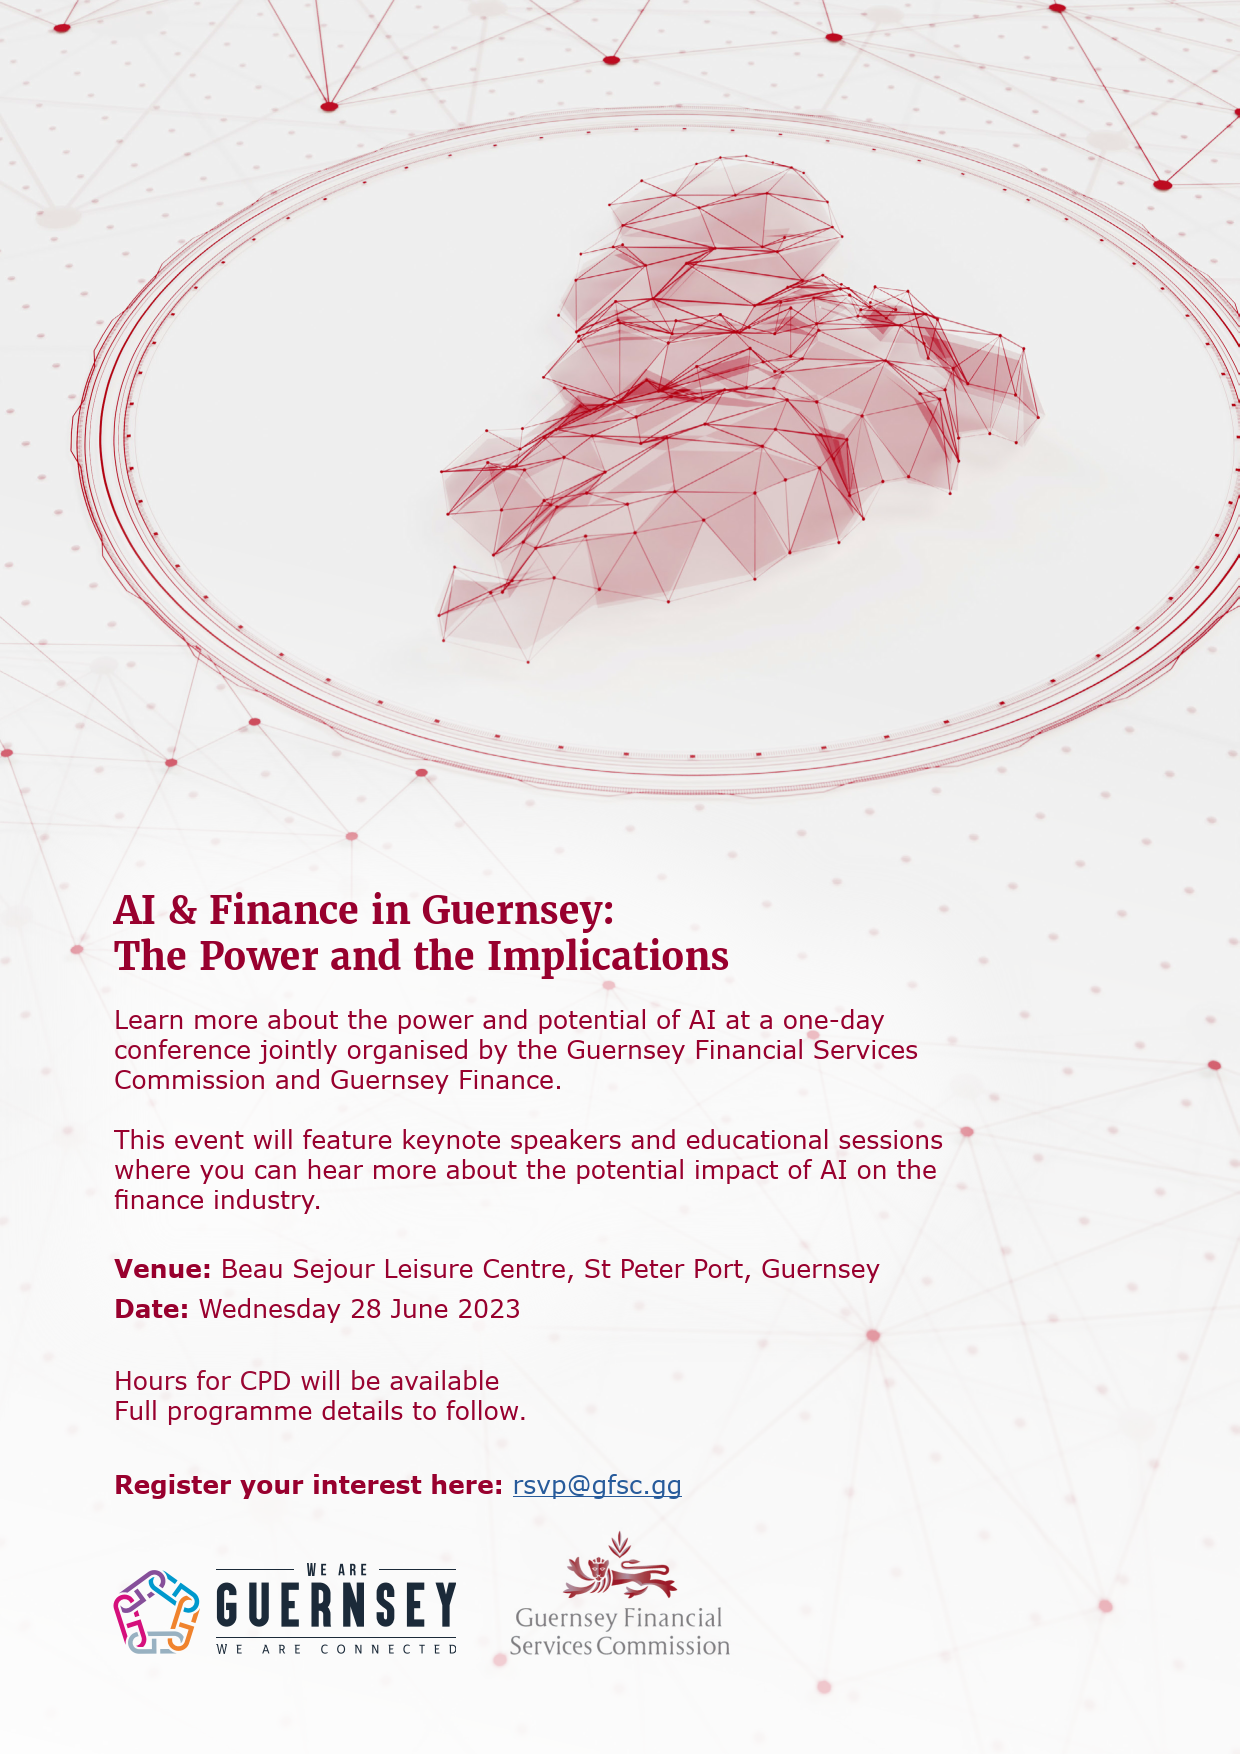 Poster for AI & Finance Conference